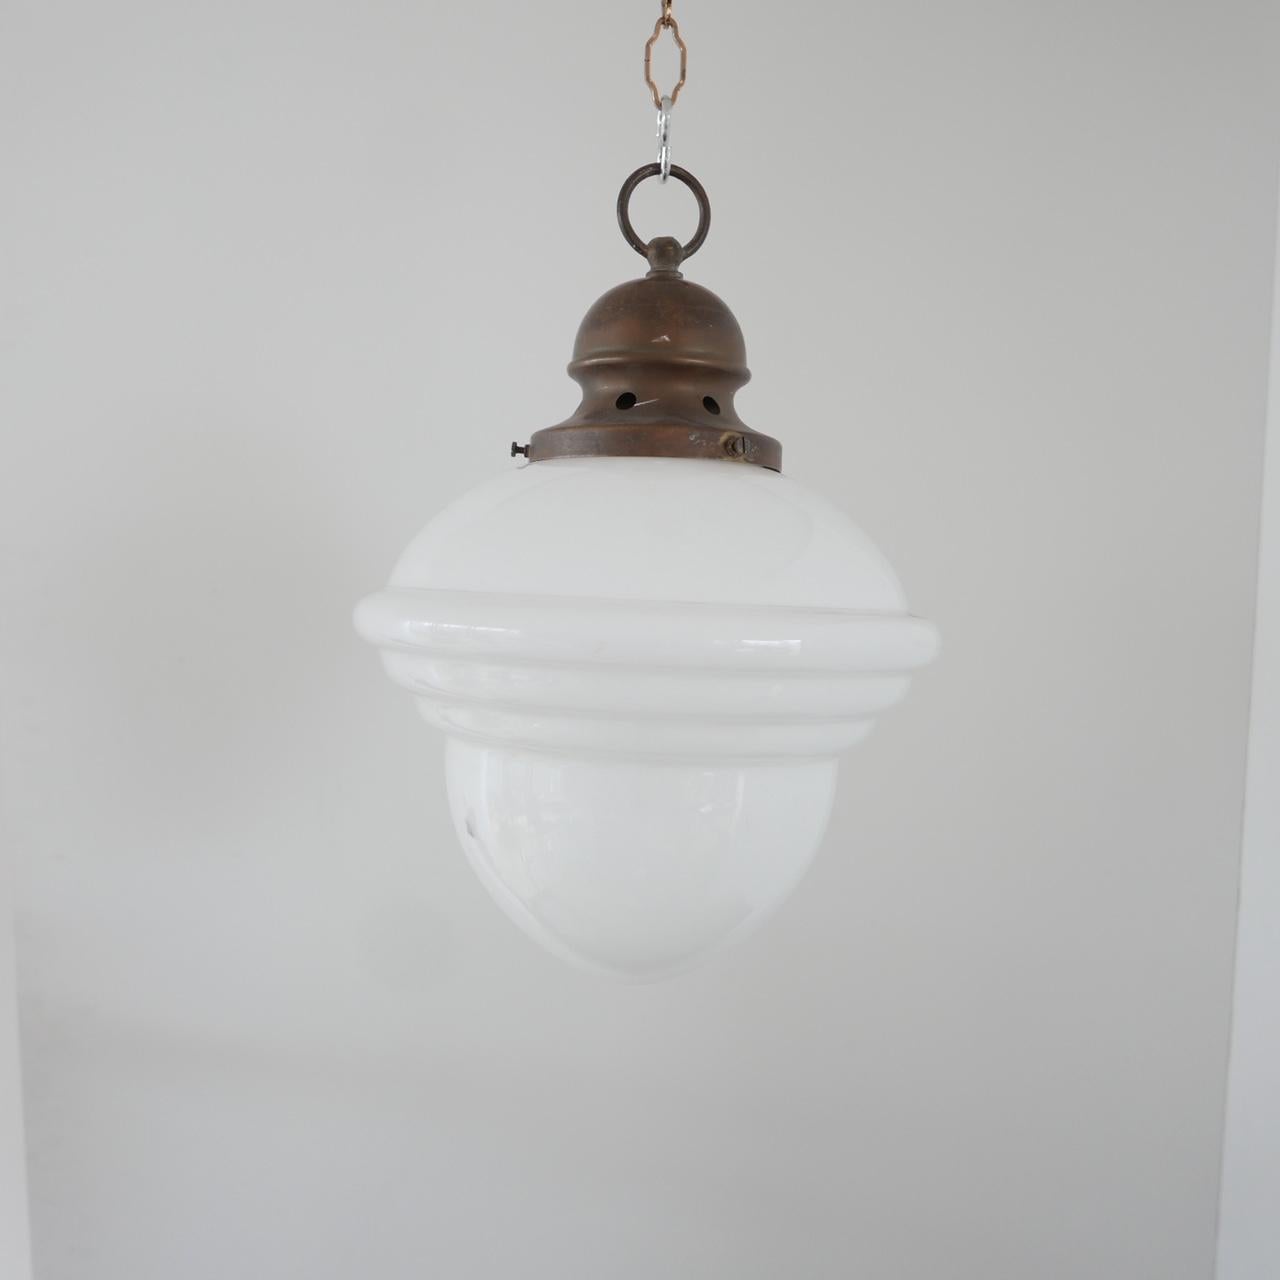 A single opaline pendant.

Early to mid-20th century.

Stepped glass, almost acorn shaped.

Brass gallery. No chain but we can provide if needed.

Dimensions: 43 height x 28 diameter in cm.